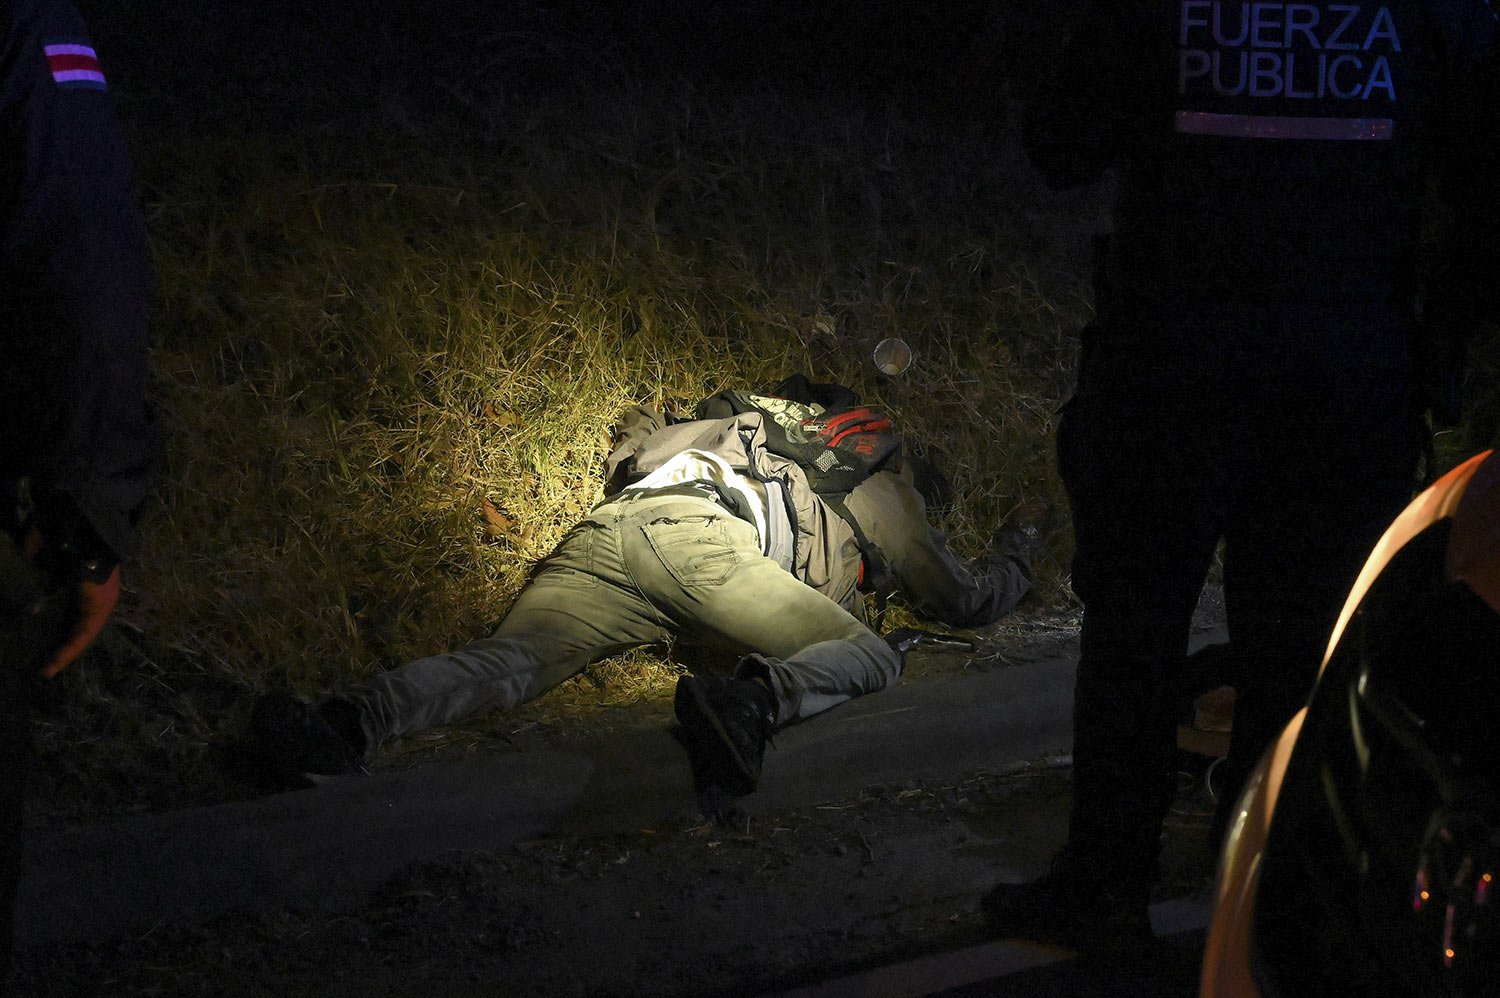  A man’s body is illuminated by police flashlights as investigators work the scene where an alleged thief and a female passenger died in a shootout during a robbery on a bus in San Jose, Costa Rica, Monday, Feb. 6, 2023. According to authorities, Cos